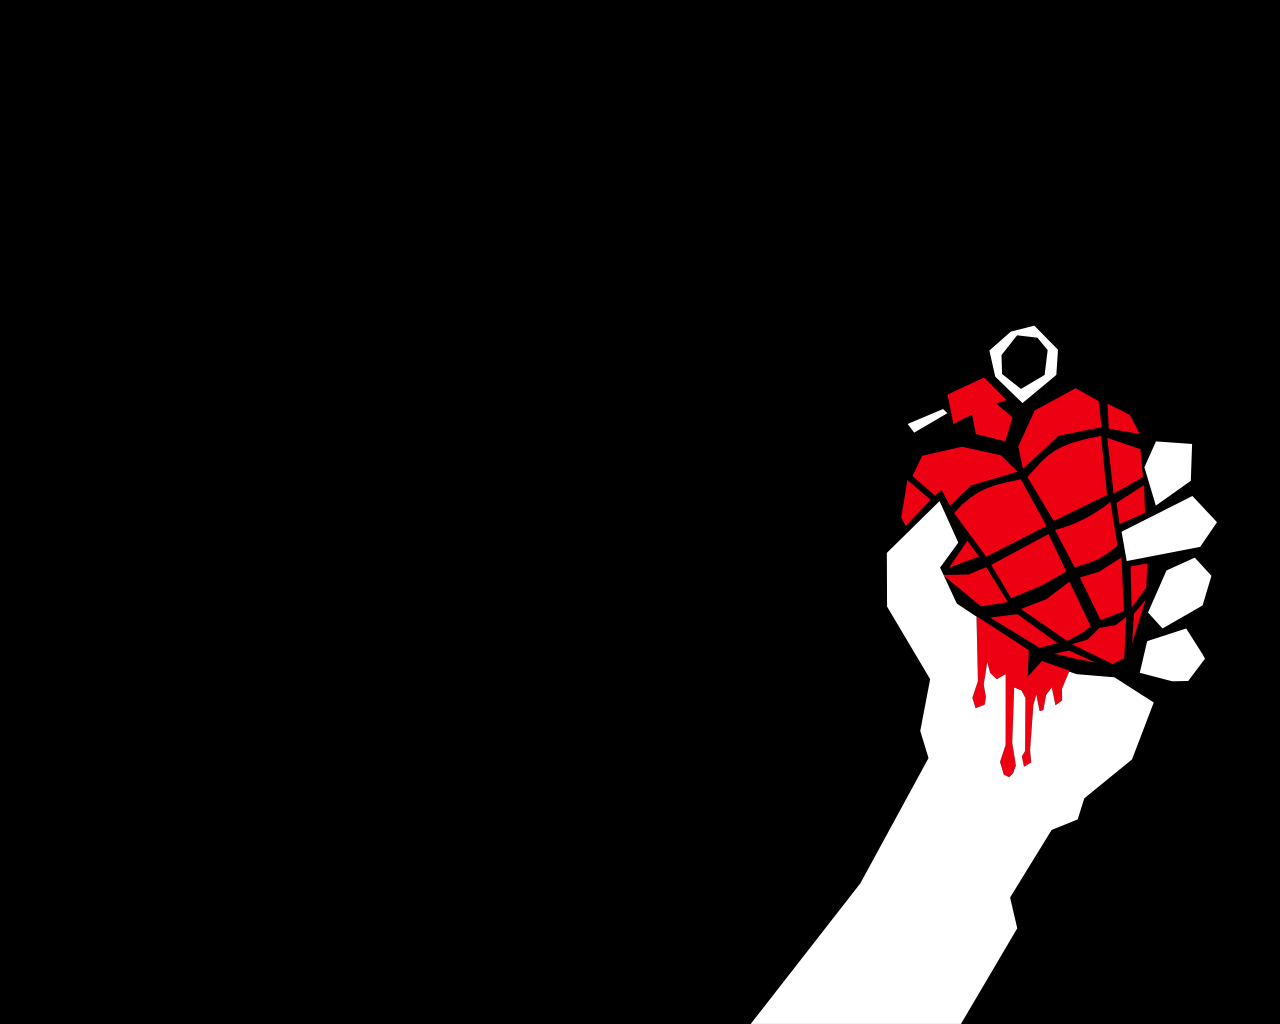 Free Download Idiot Green Day Wallpaper American Idiot Green Day Iphone Wallpaper 1280x1024 For Your Desktop Mobile Tablet Explore 73 Green Day Wallpapers Hd Wallpaper Green Green Wallpaper For